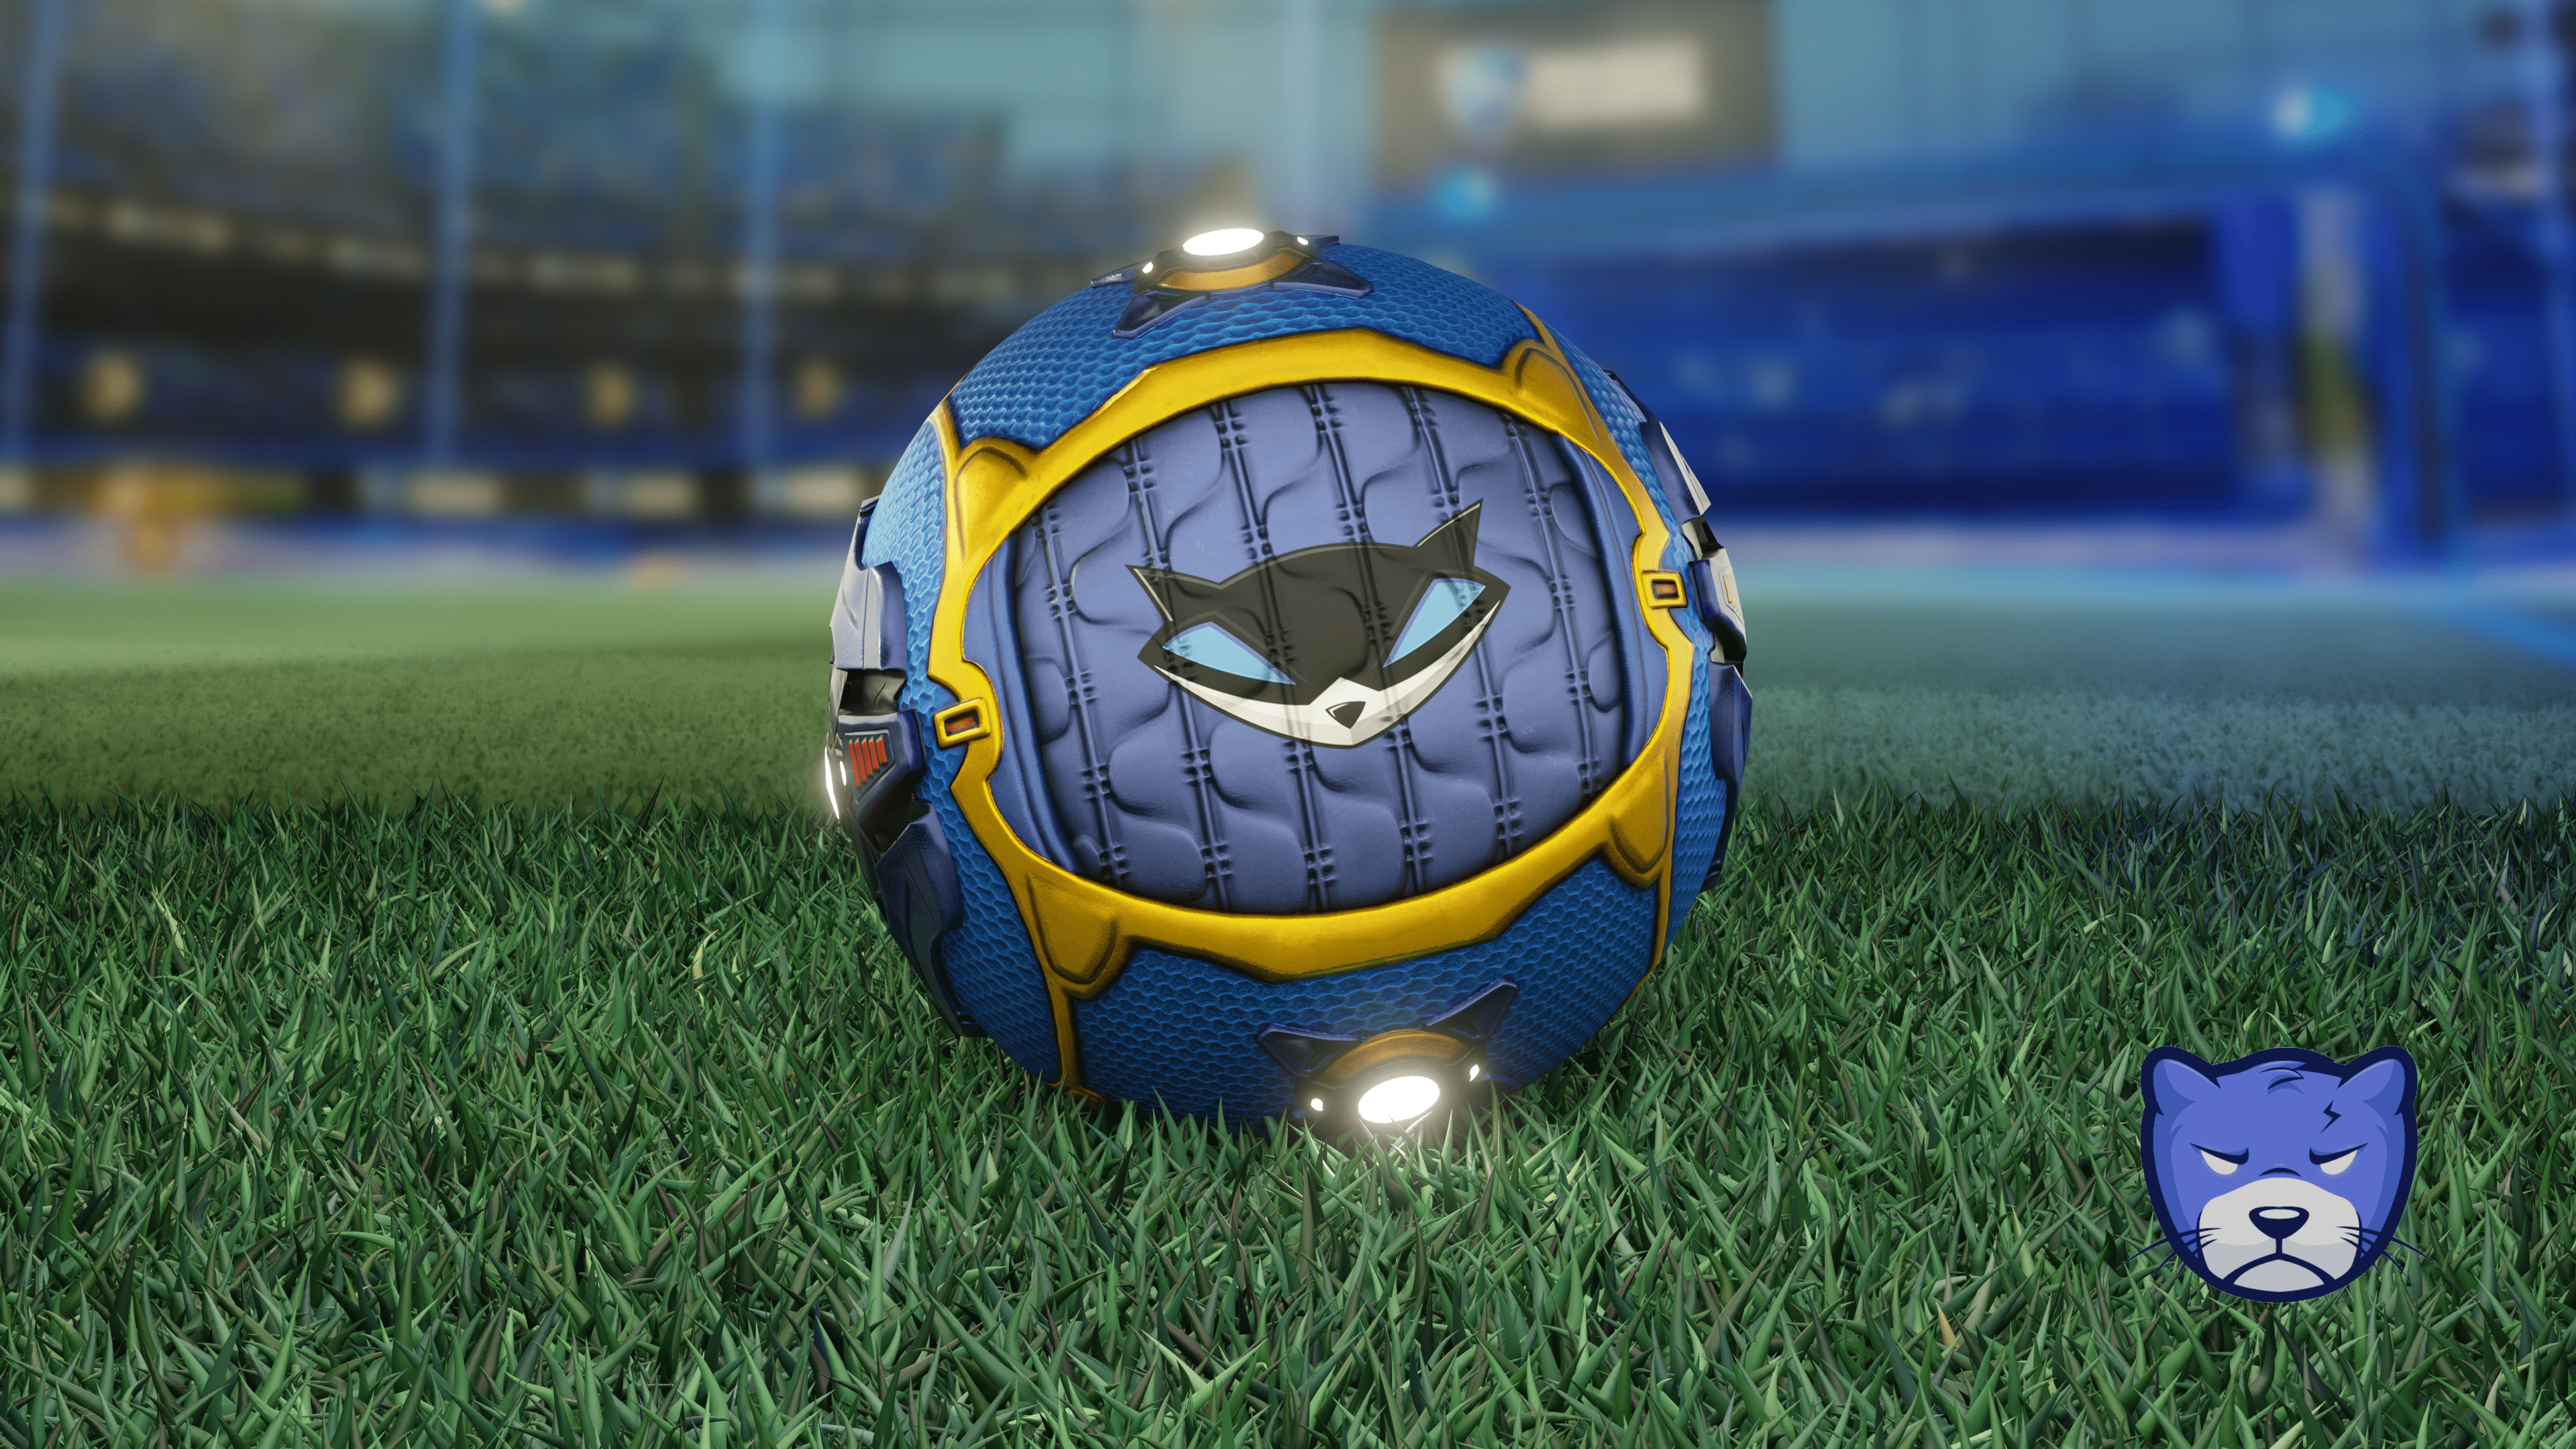 Sly Cooper Ball